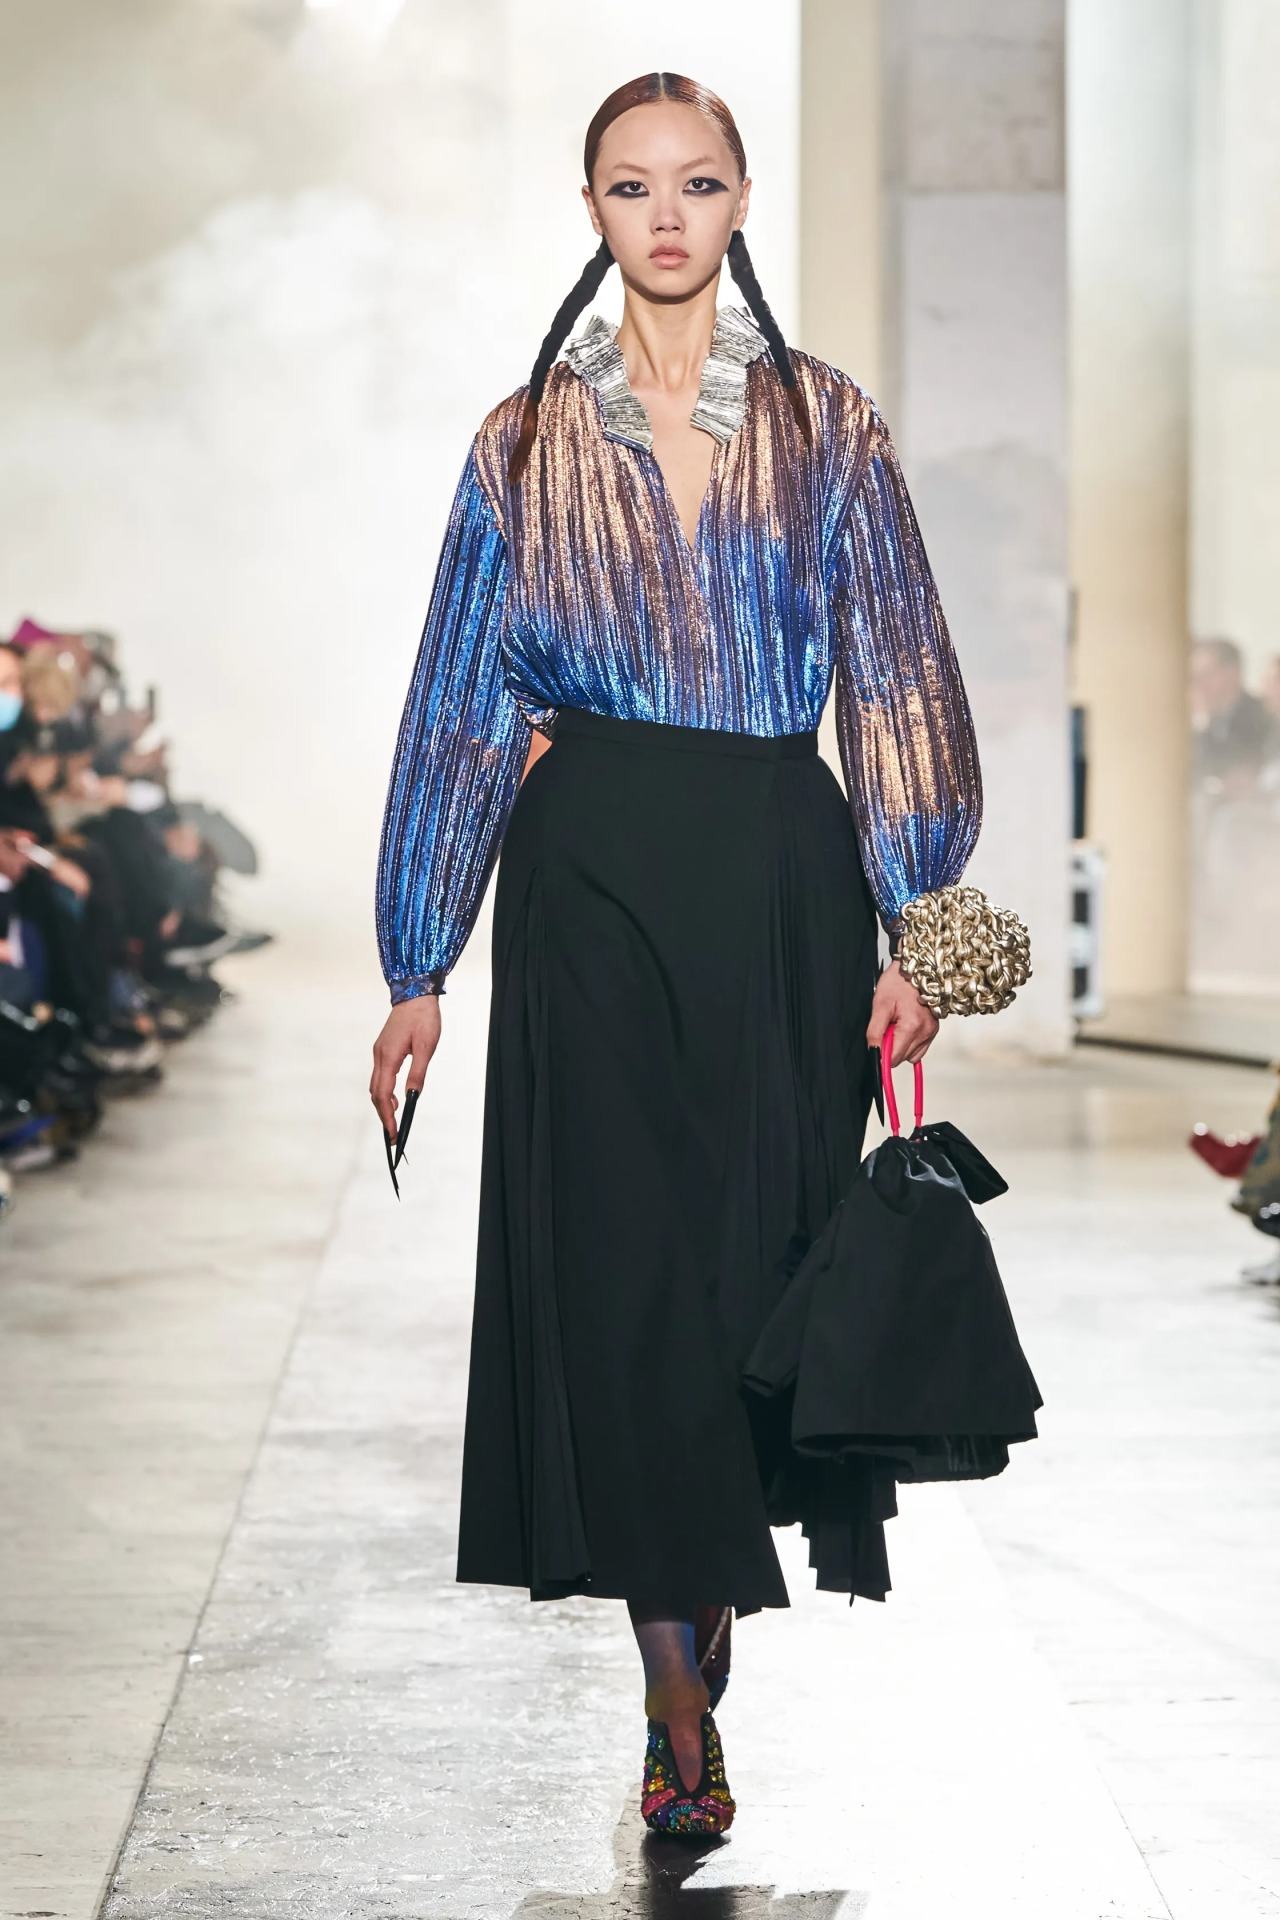 Rochas Fall 2022 Ready-to-WearPhotos by Alessandro Lucioni / Gorunway.com #fashion#rochas#fall 2022#ready-to-wear#scopophobia / #he talked about how the rochas woman is a sophisticated intellectual and stuff